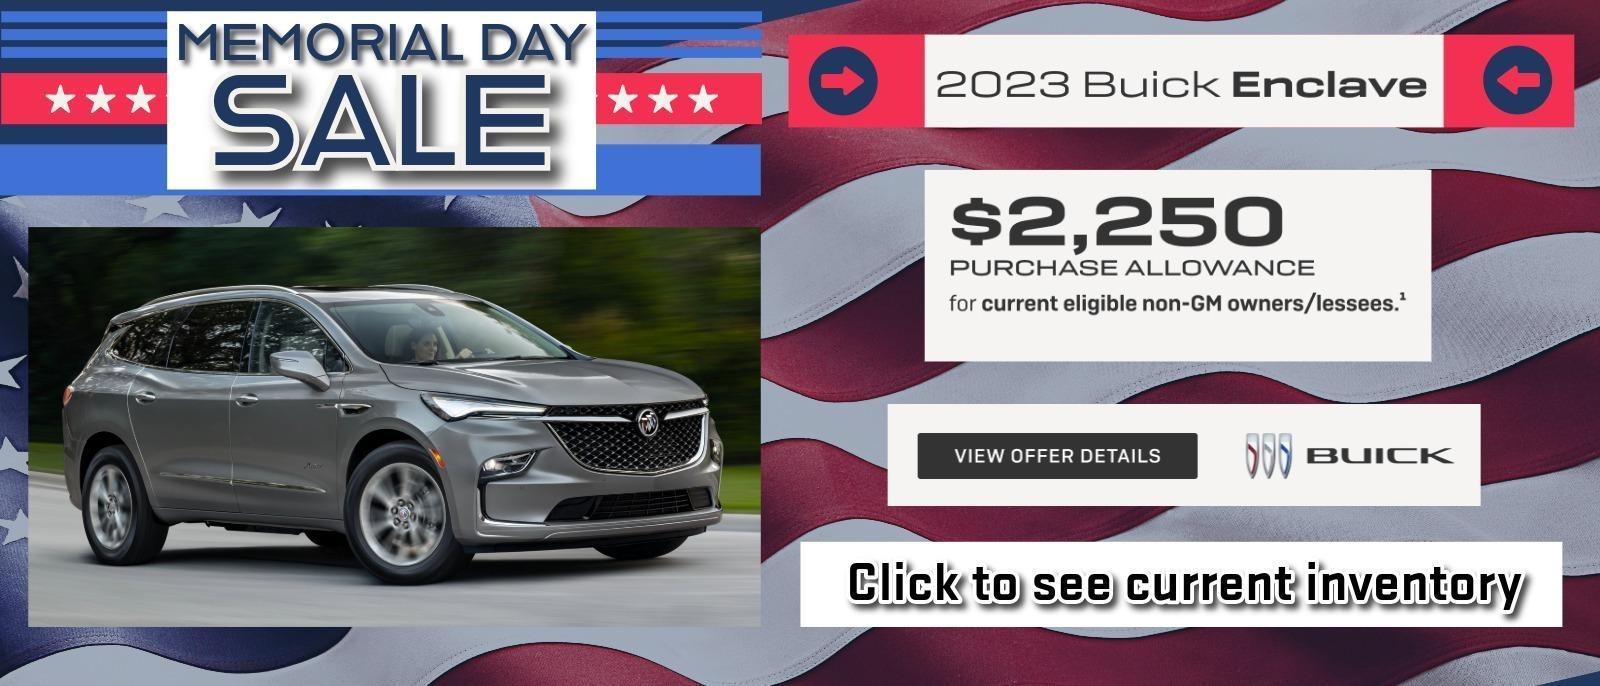 Slide for Memorial Day Sale offer of $2,250 Purchase Allowance on 2023 Buick Enclaves.  Some restrictions apply.